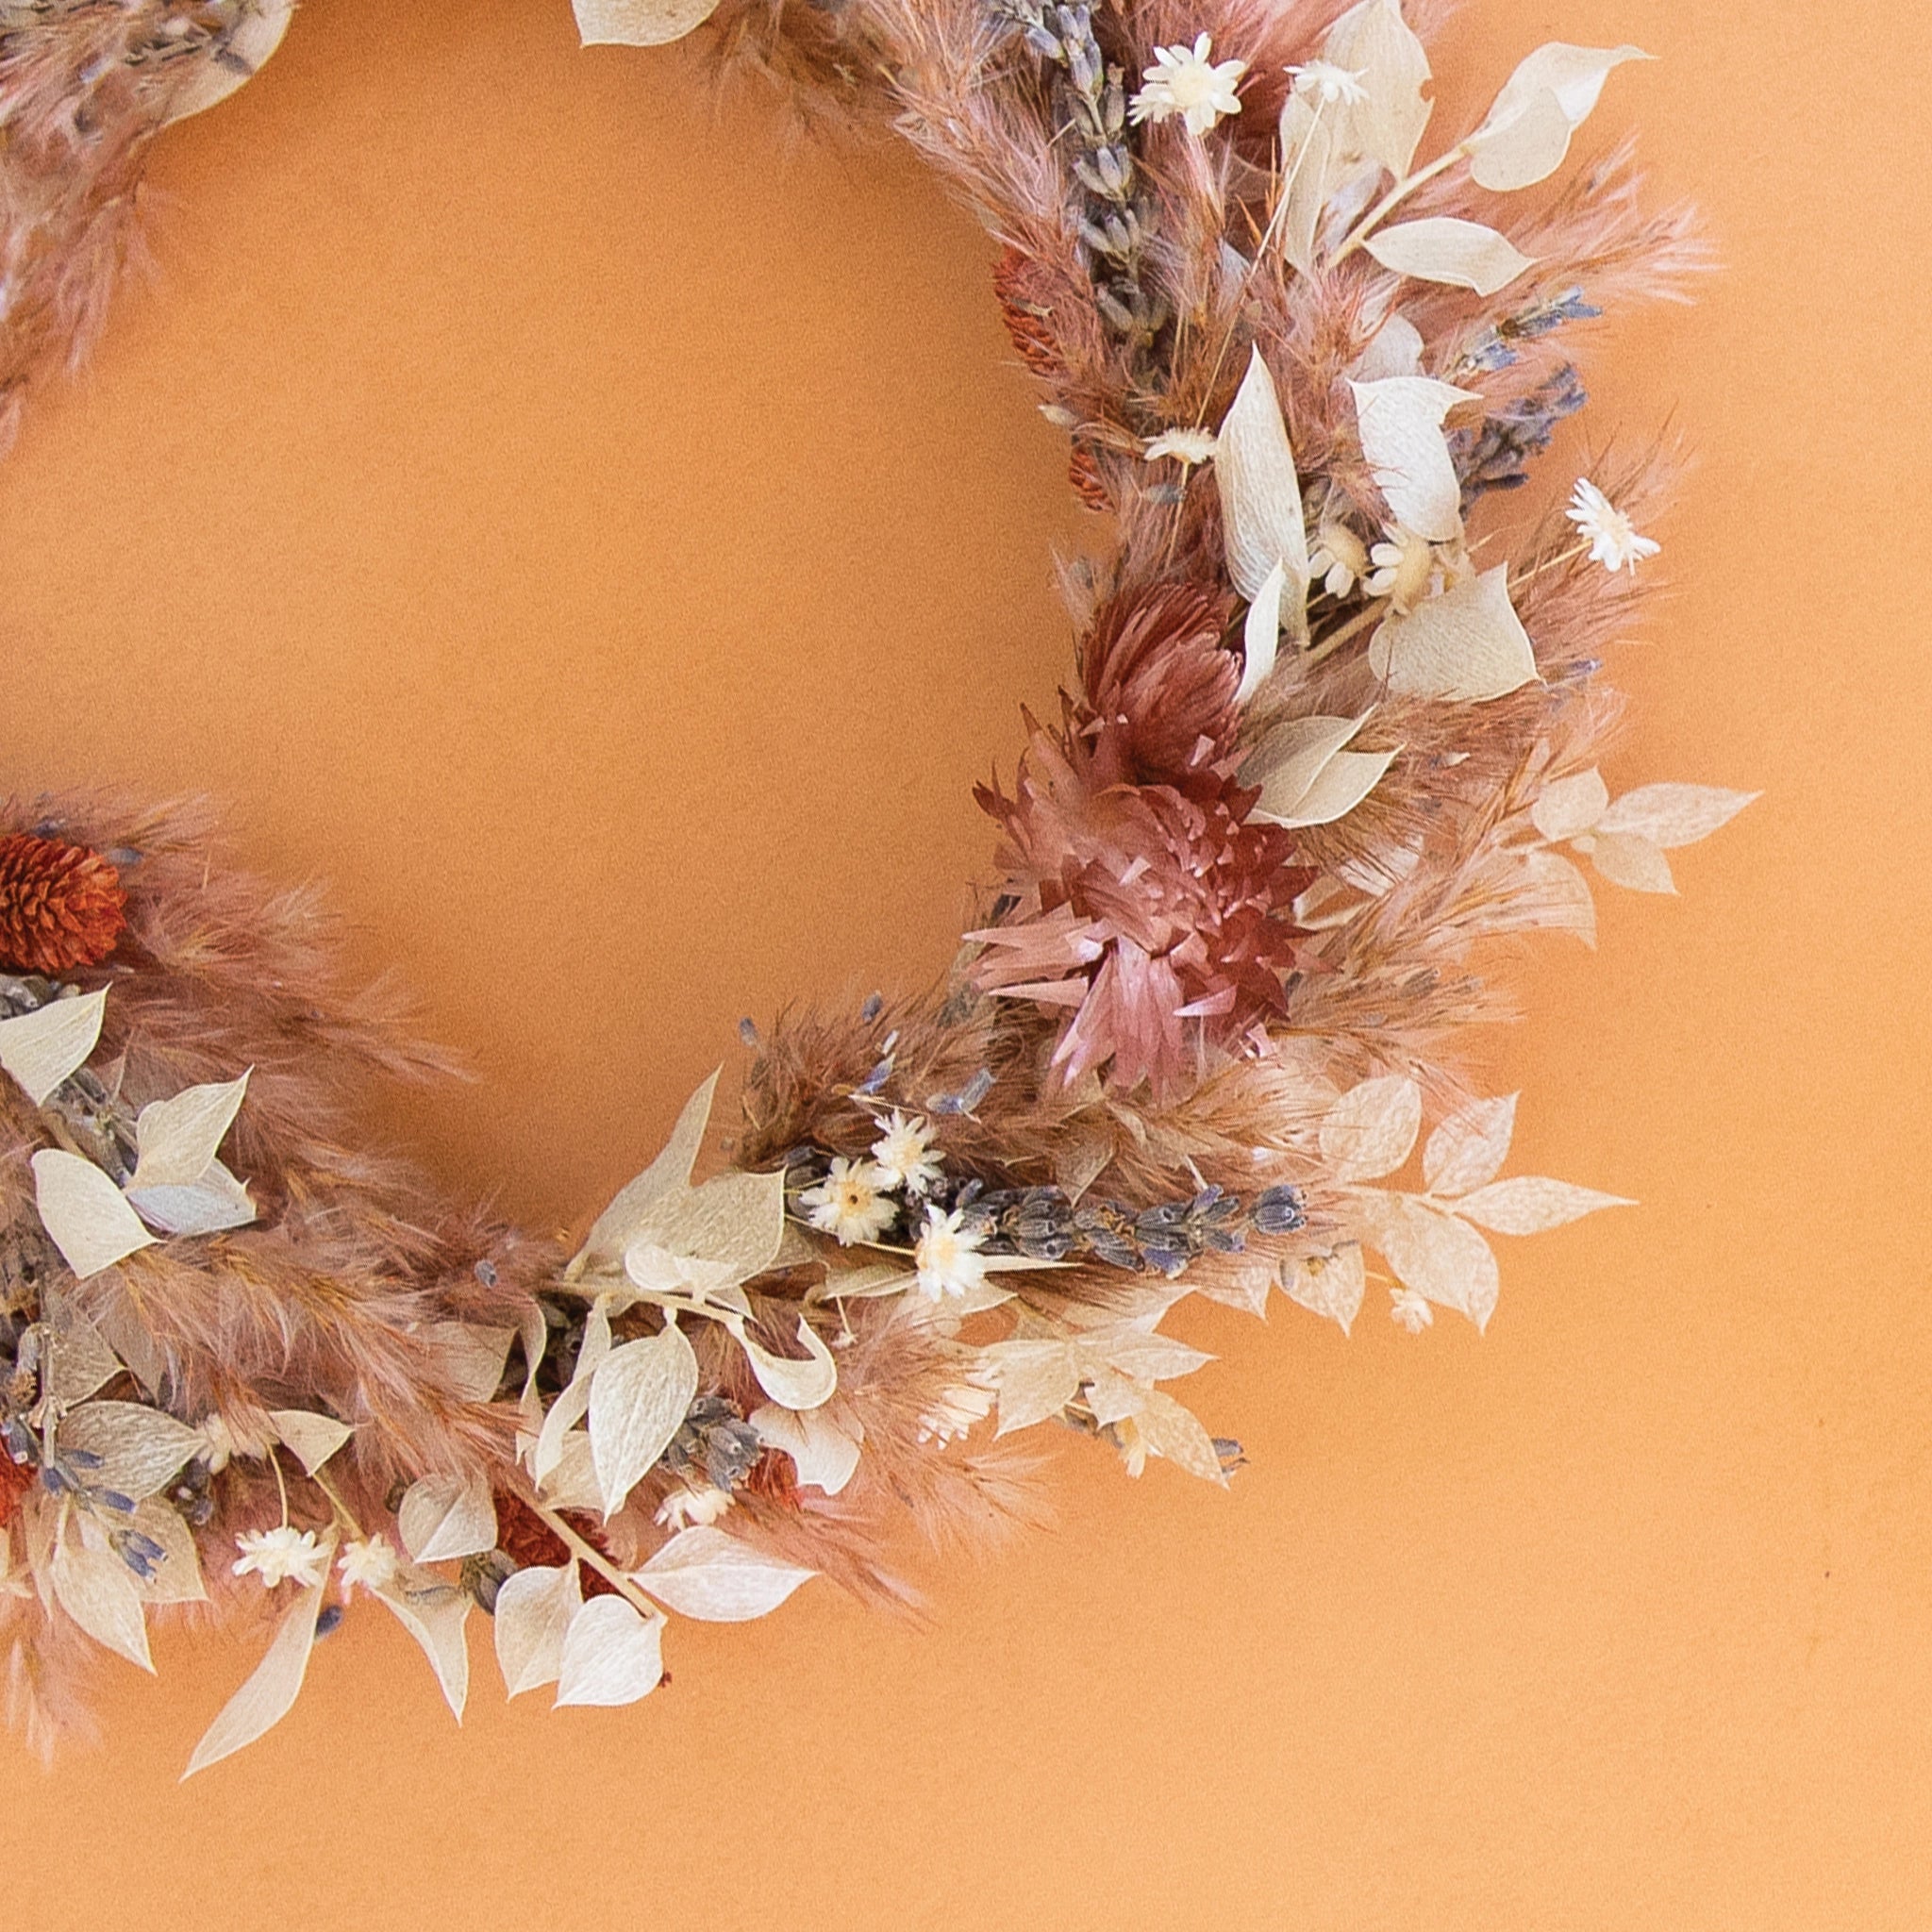 On an orange background is a flower crown made up of a variety of dried florals. 